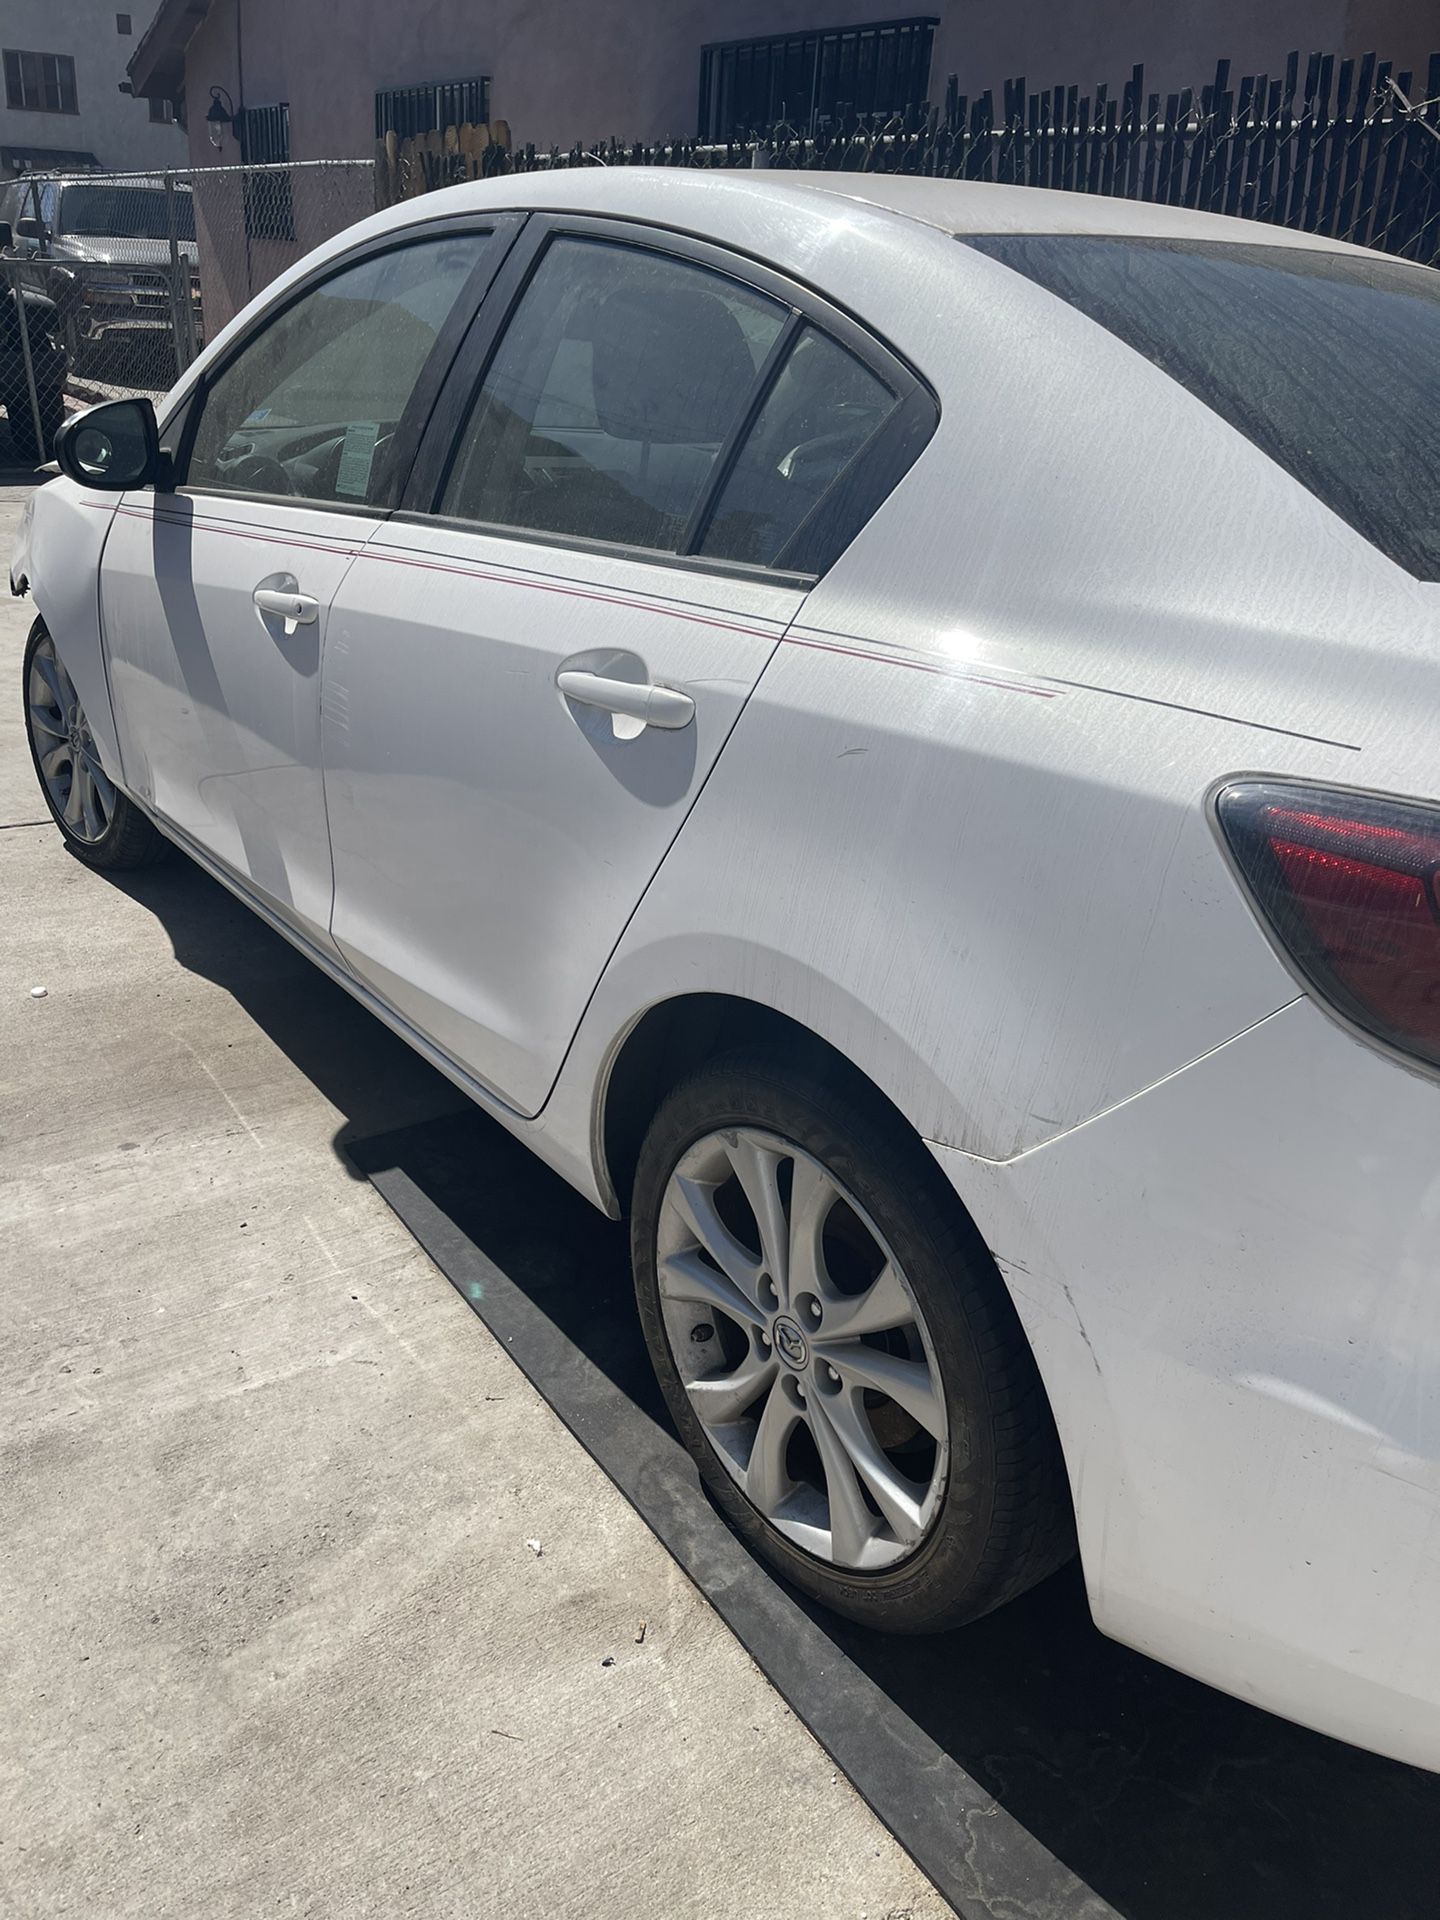 2010 Mazda 3 ..... Left Front Suspension Damage Need Front Bumper One Head Light